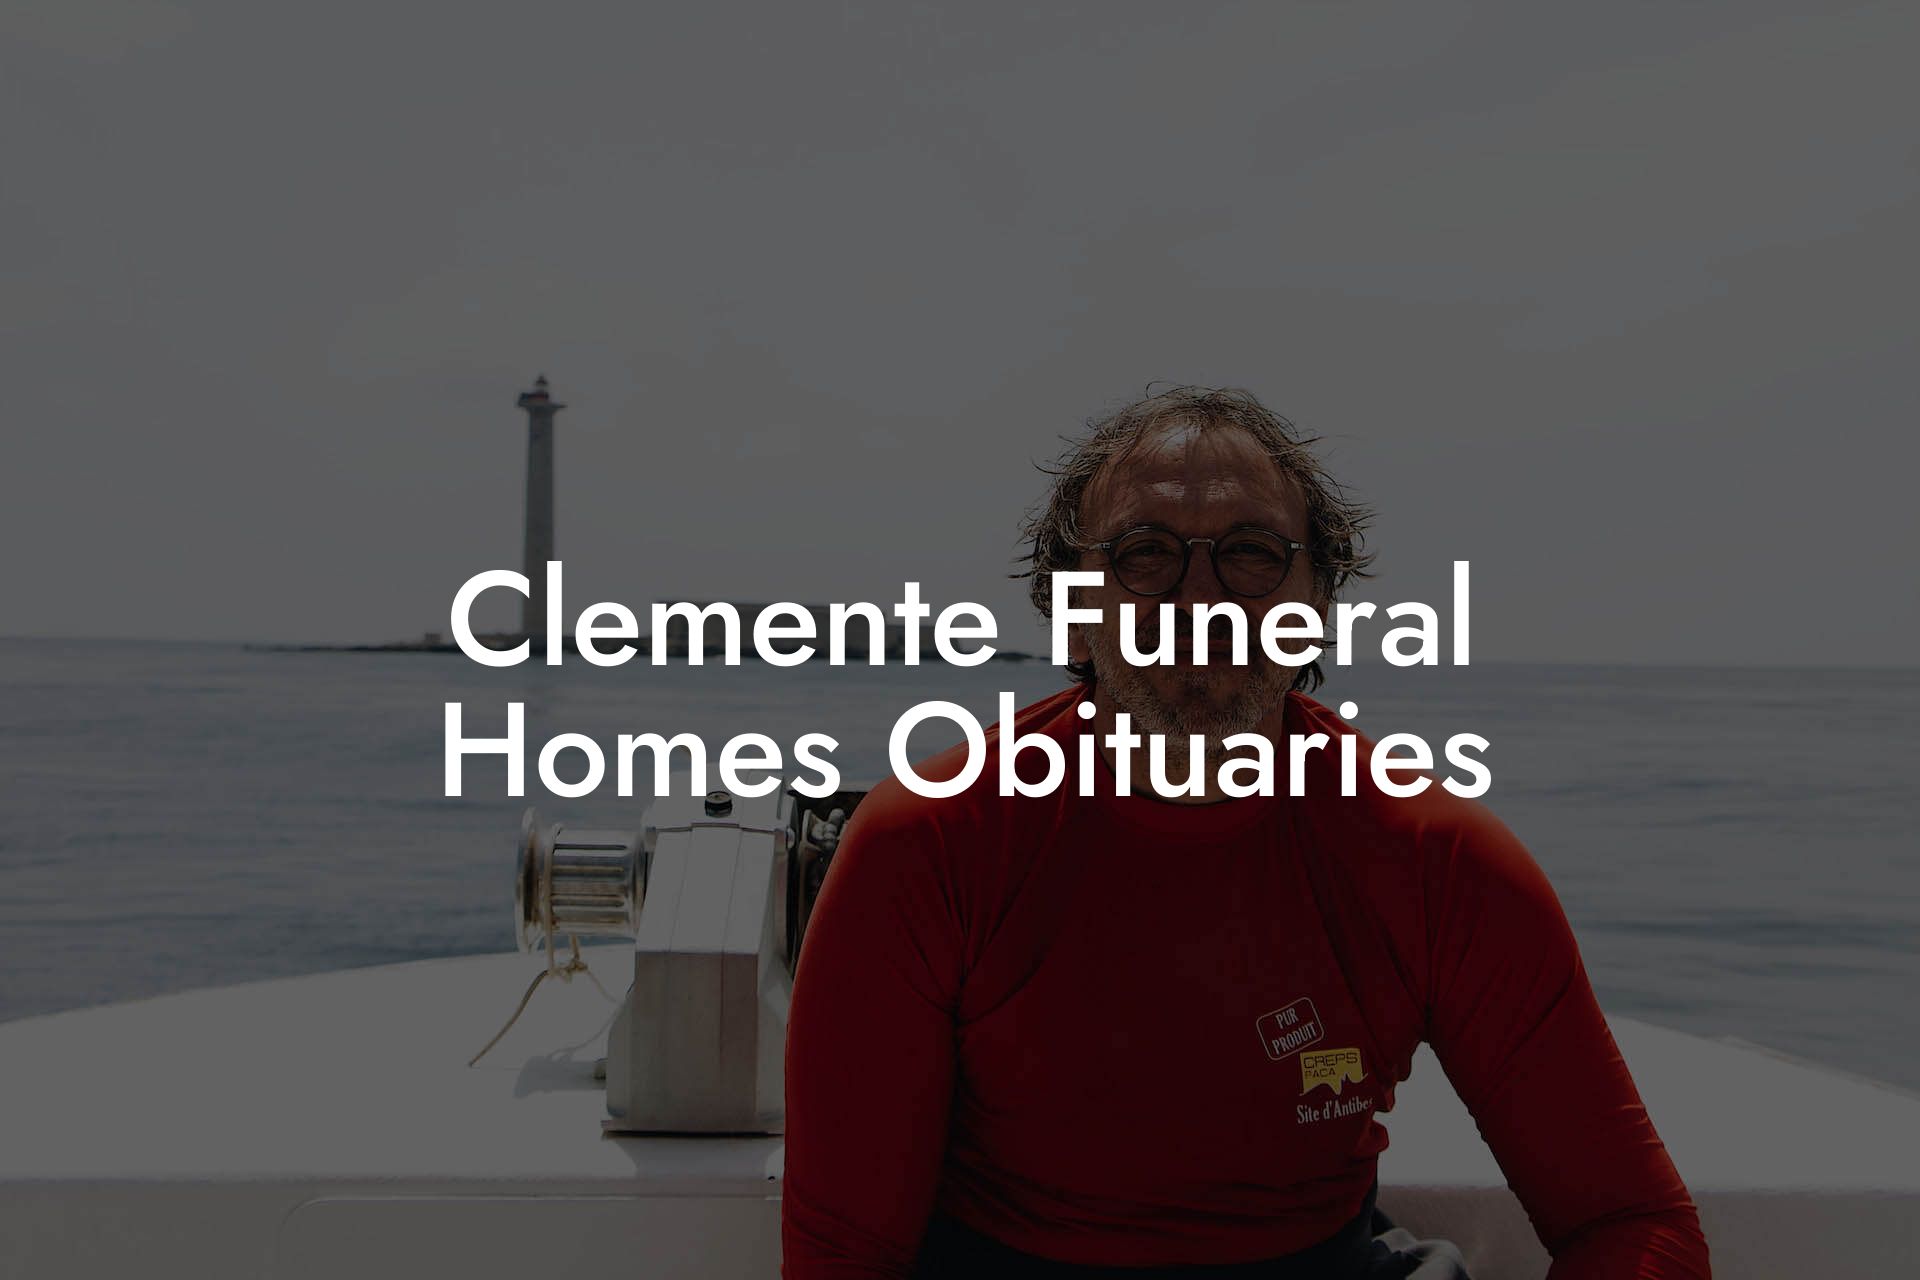 Clemente Funeral Homes Obituaries